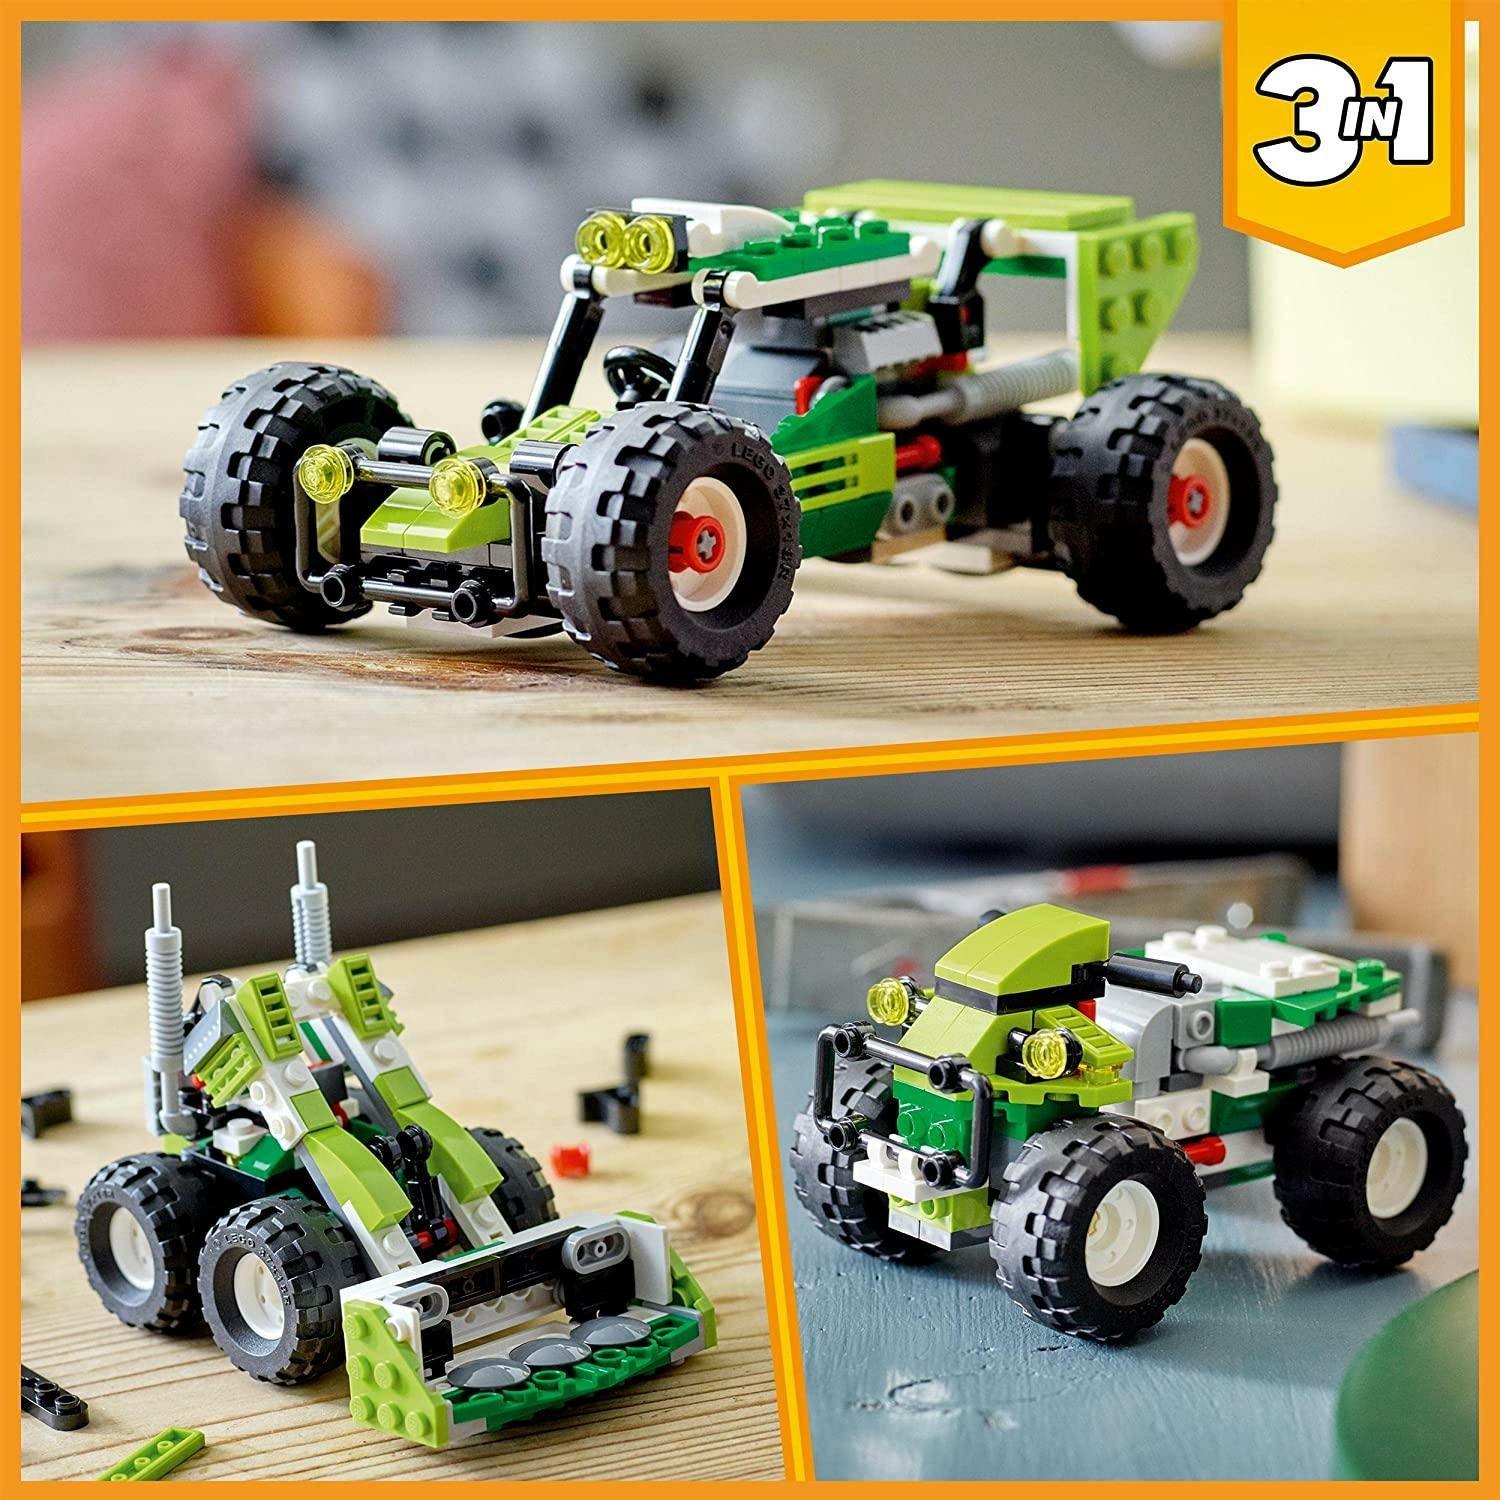 LEGO 31123 Creator 3in1 Off-road Buggy to Skid Loader Digger to ATV Car Toy 160 Pieces - BumbleToys - 8-13 Years, Boys, Creator 3In1, LEGO, OXE, Pre-Order